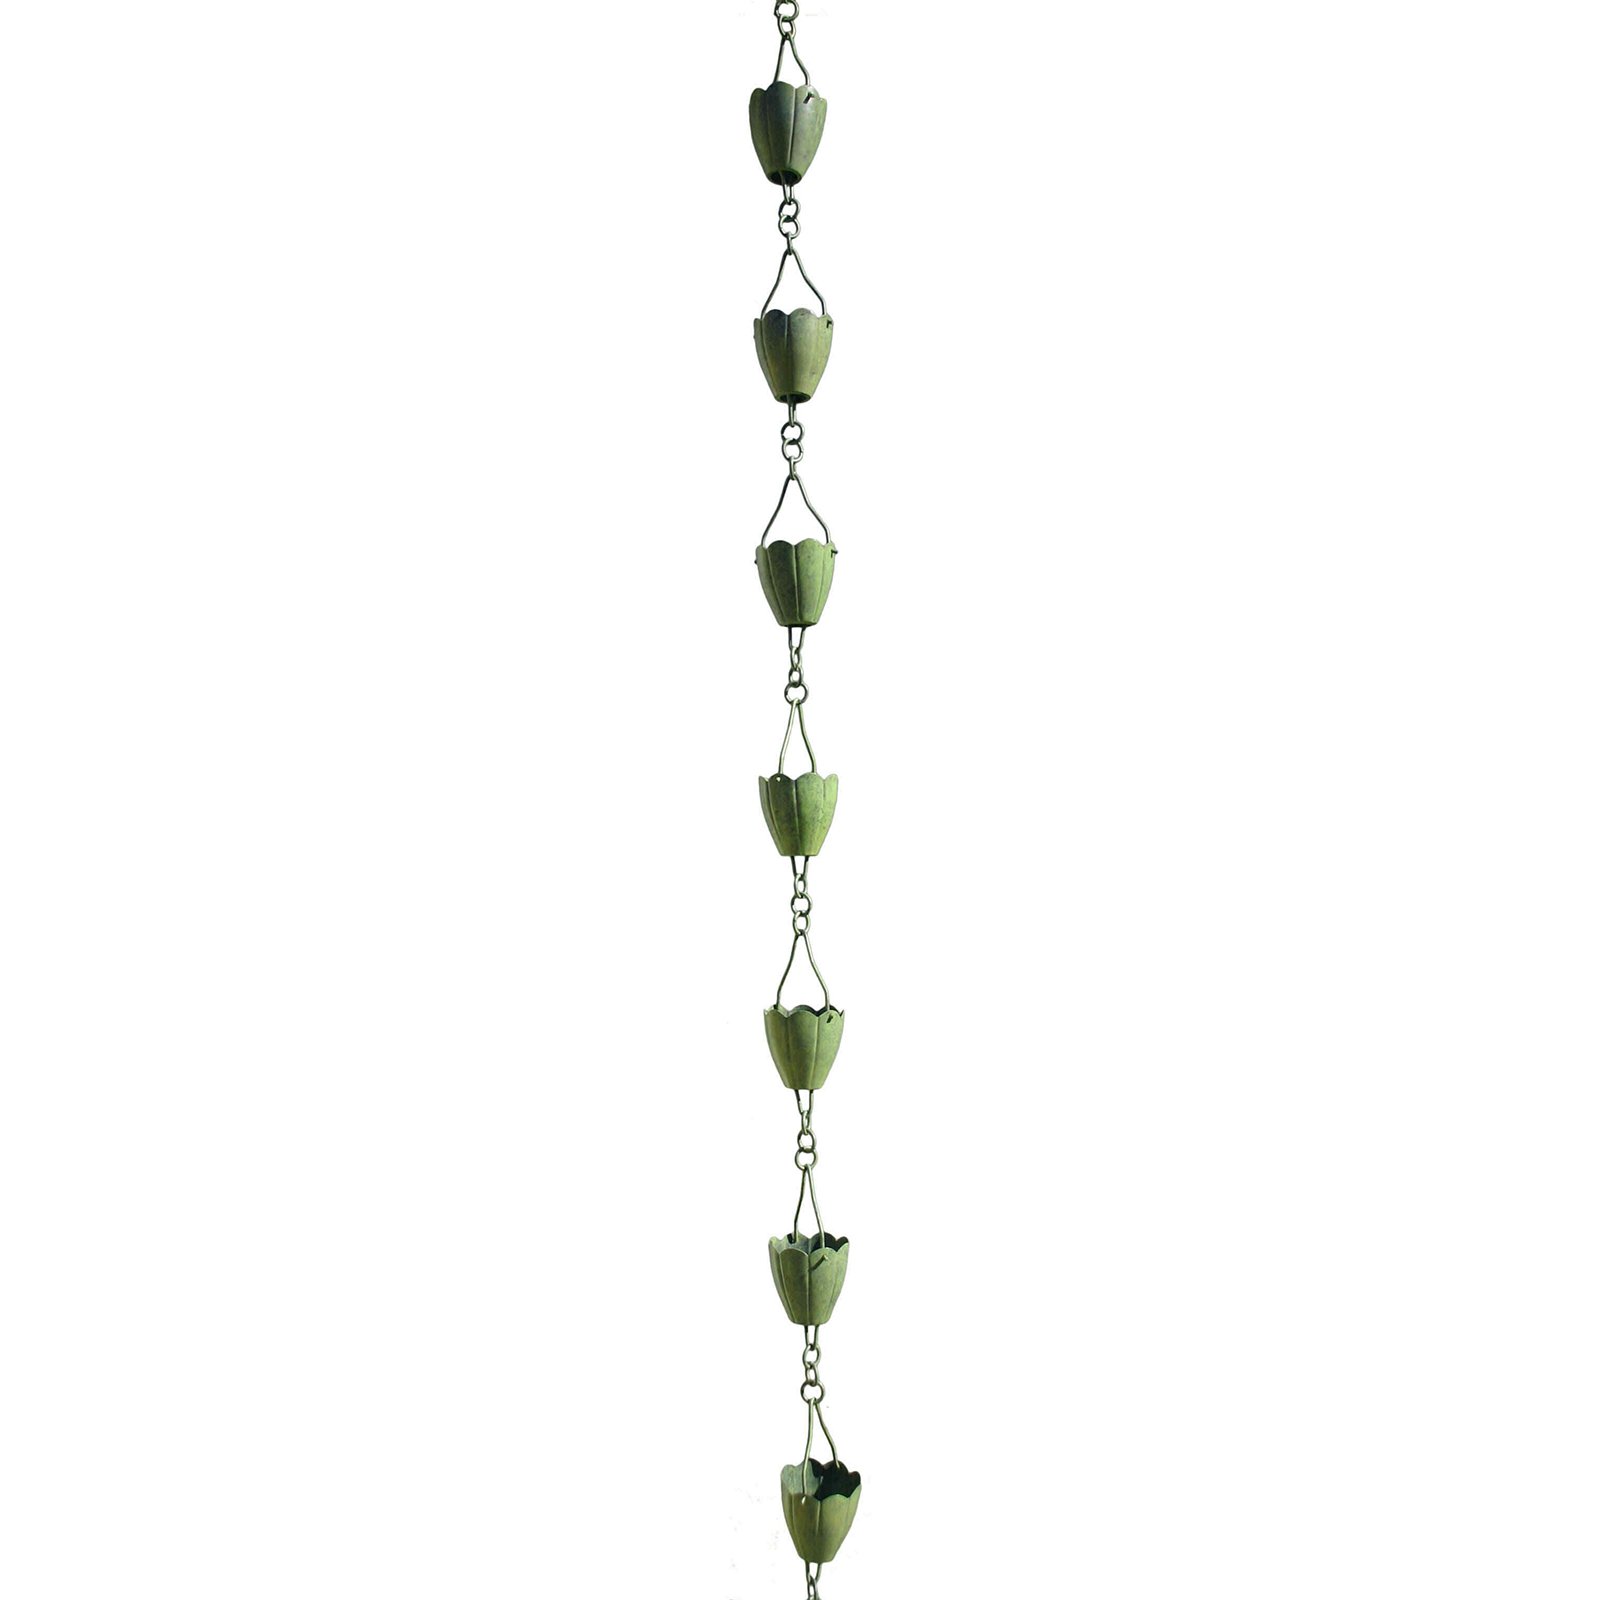 Patina Products Verdigris Flower Cup Rain Chain R253 - image 2 of 3